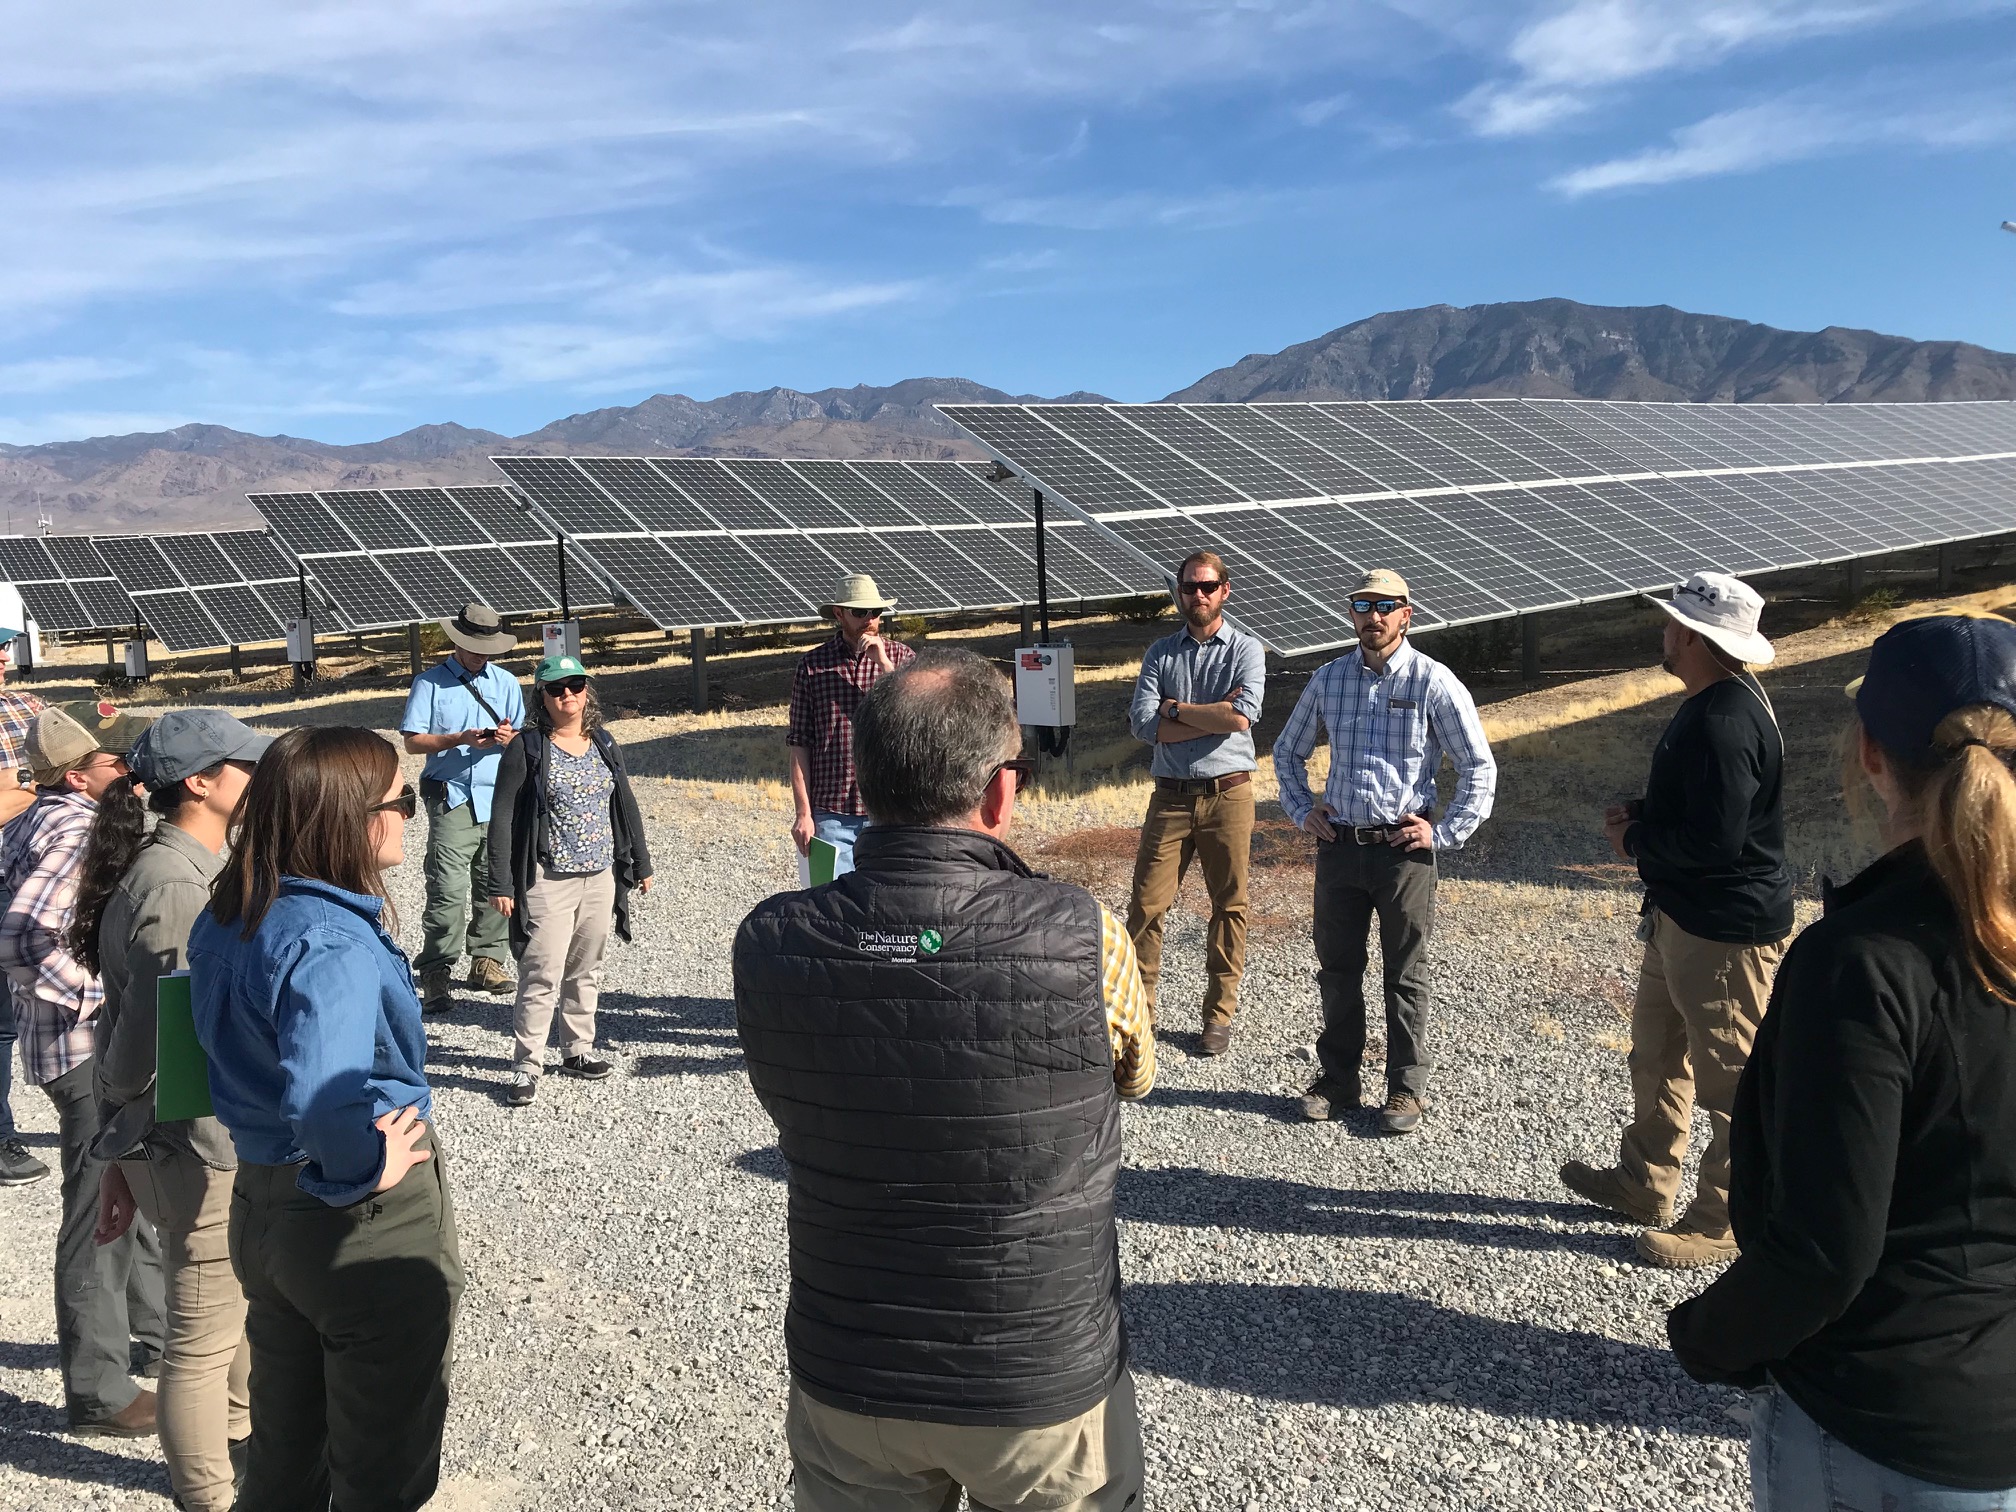 Mining the sun: How Nevada and West Virginia are reclaiming former mine lands with solar panels - Renewable Energy World